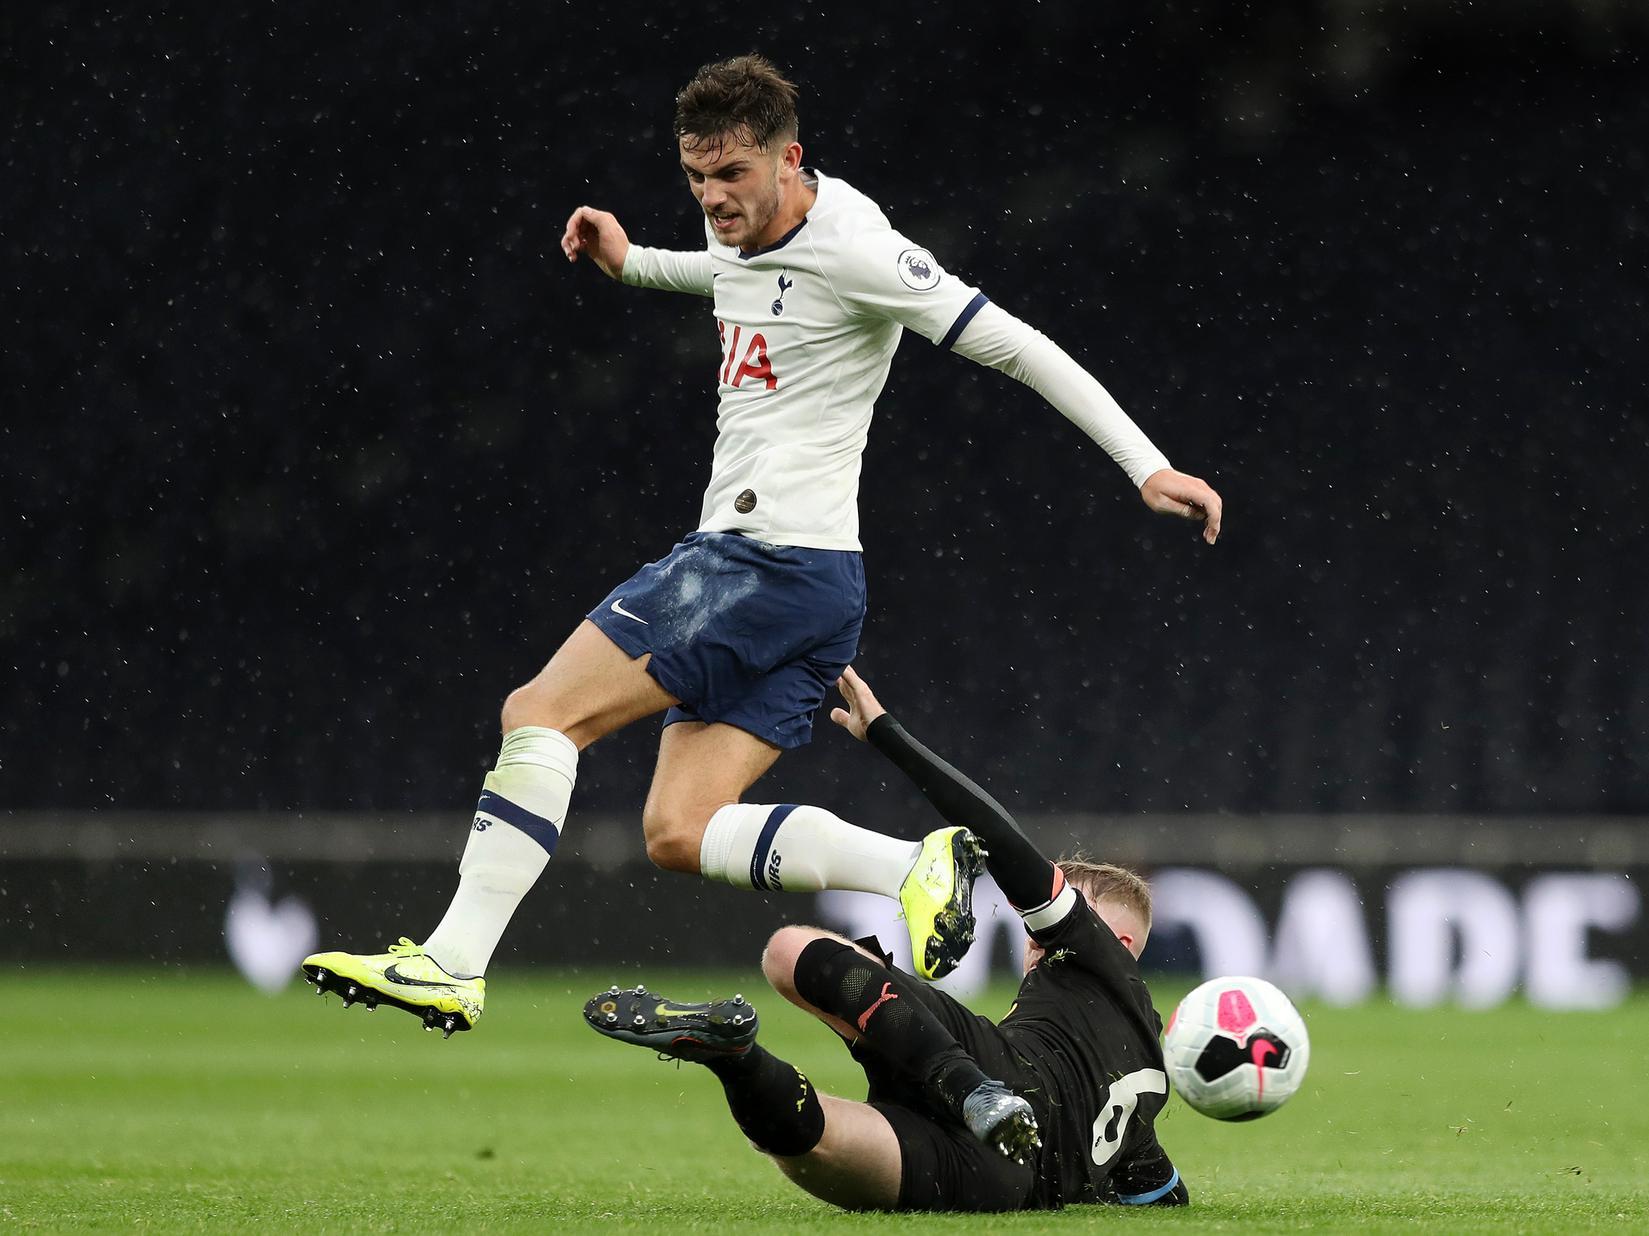 Alan Pardew's ADO Den Haag are the latest side to take an interest in Spurs striker Troy Parrott, and join the likes of QPR, Charlton, and Sheffield Wednesday in his pursuit. (Daily Mail)